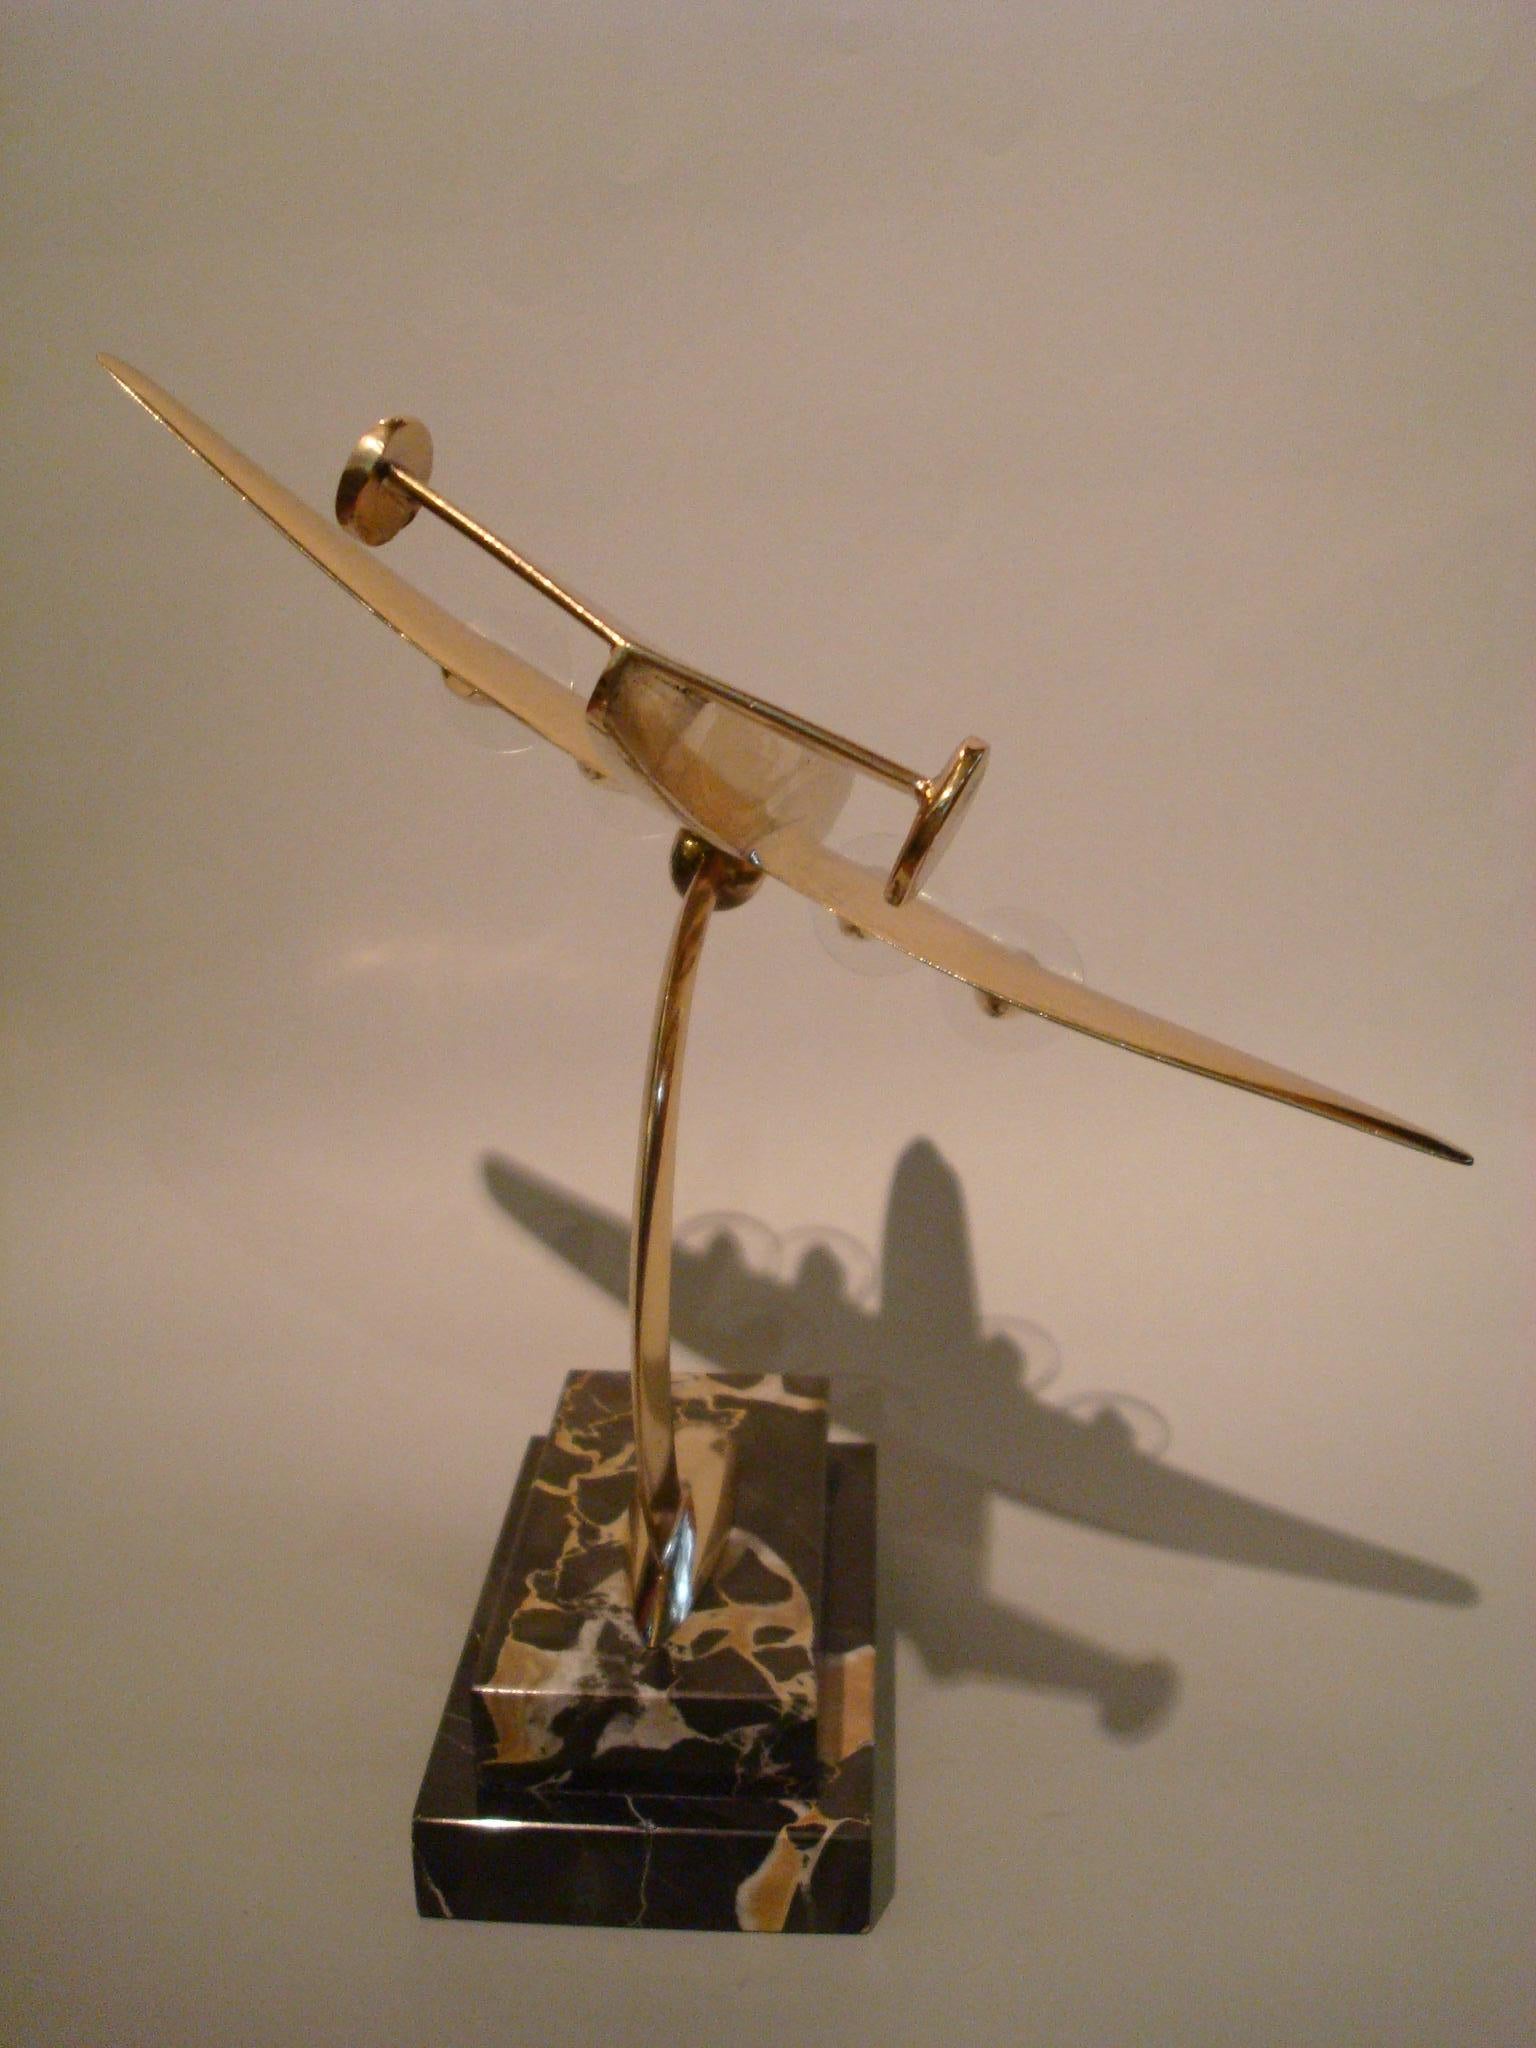 20th Century Art Deco / Midcentury Desk Model Airplane with Marble Base, 1930s